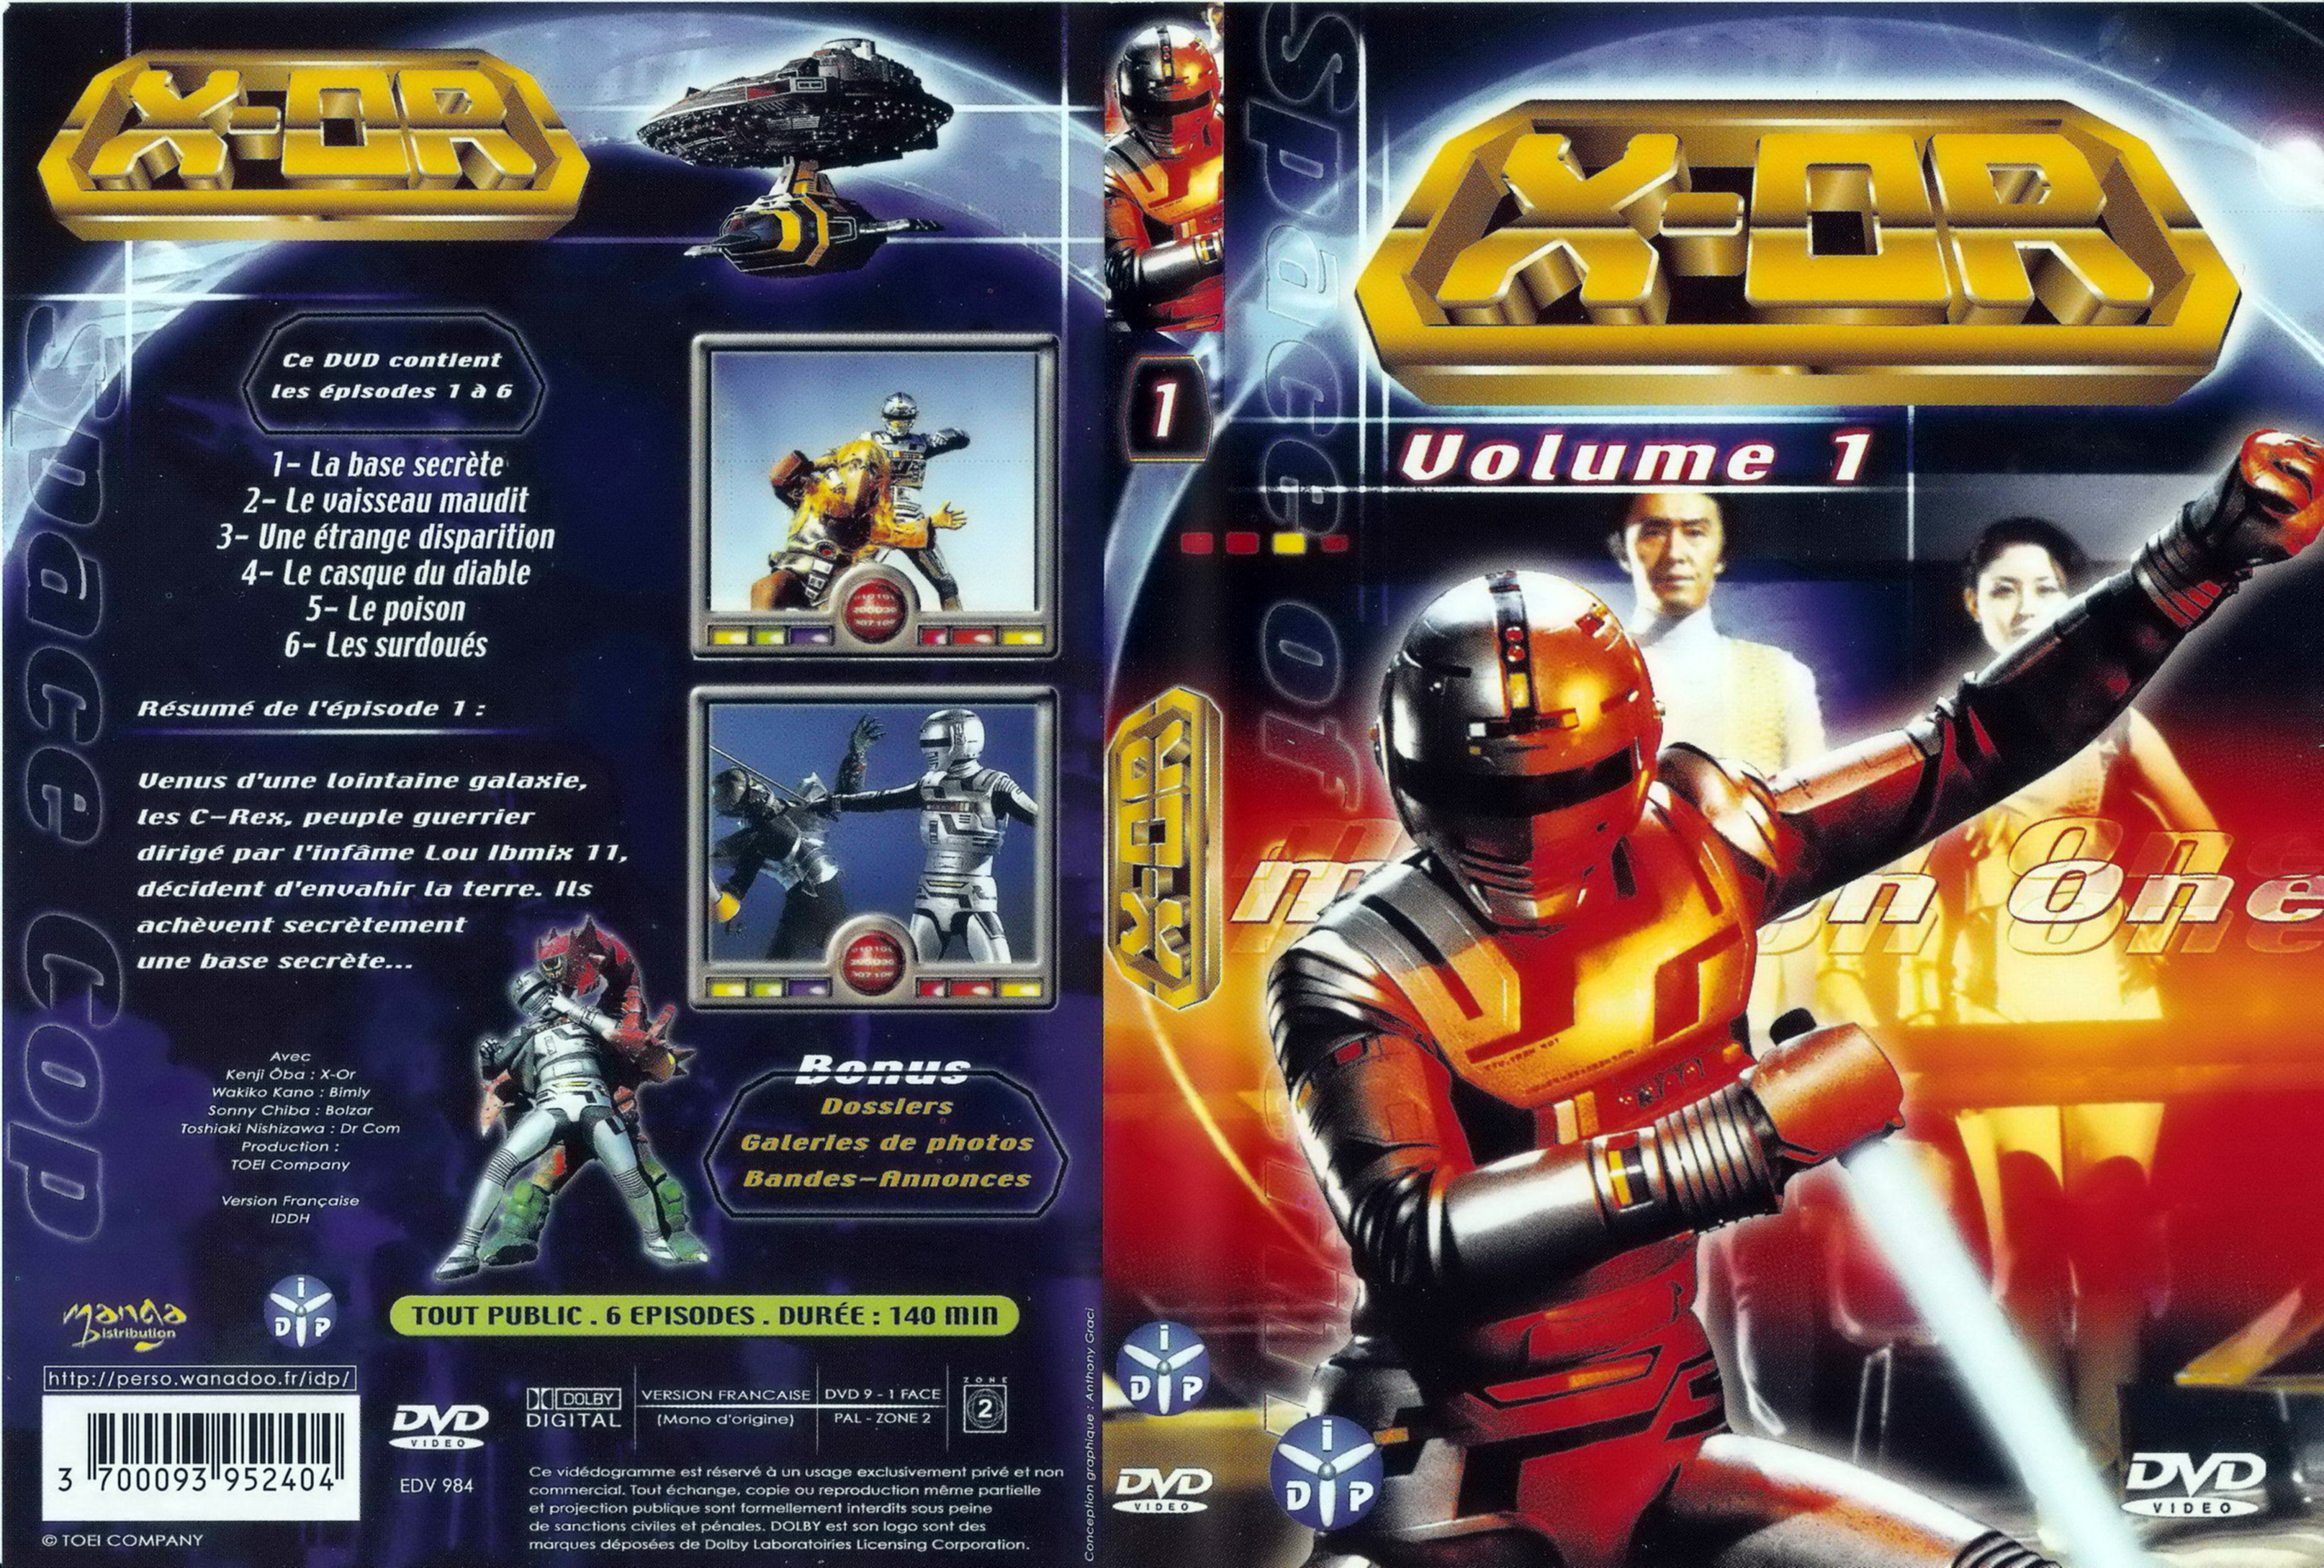 Jaquette DVD X-or vol 01